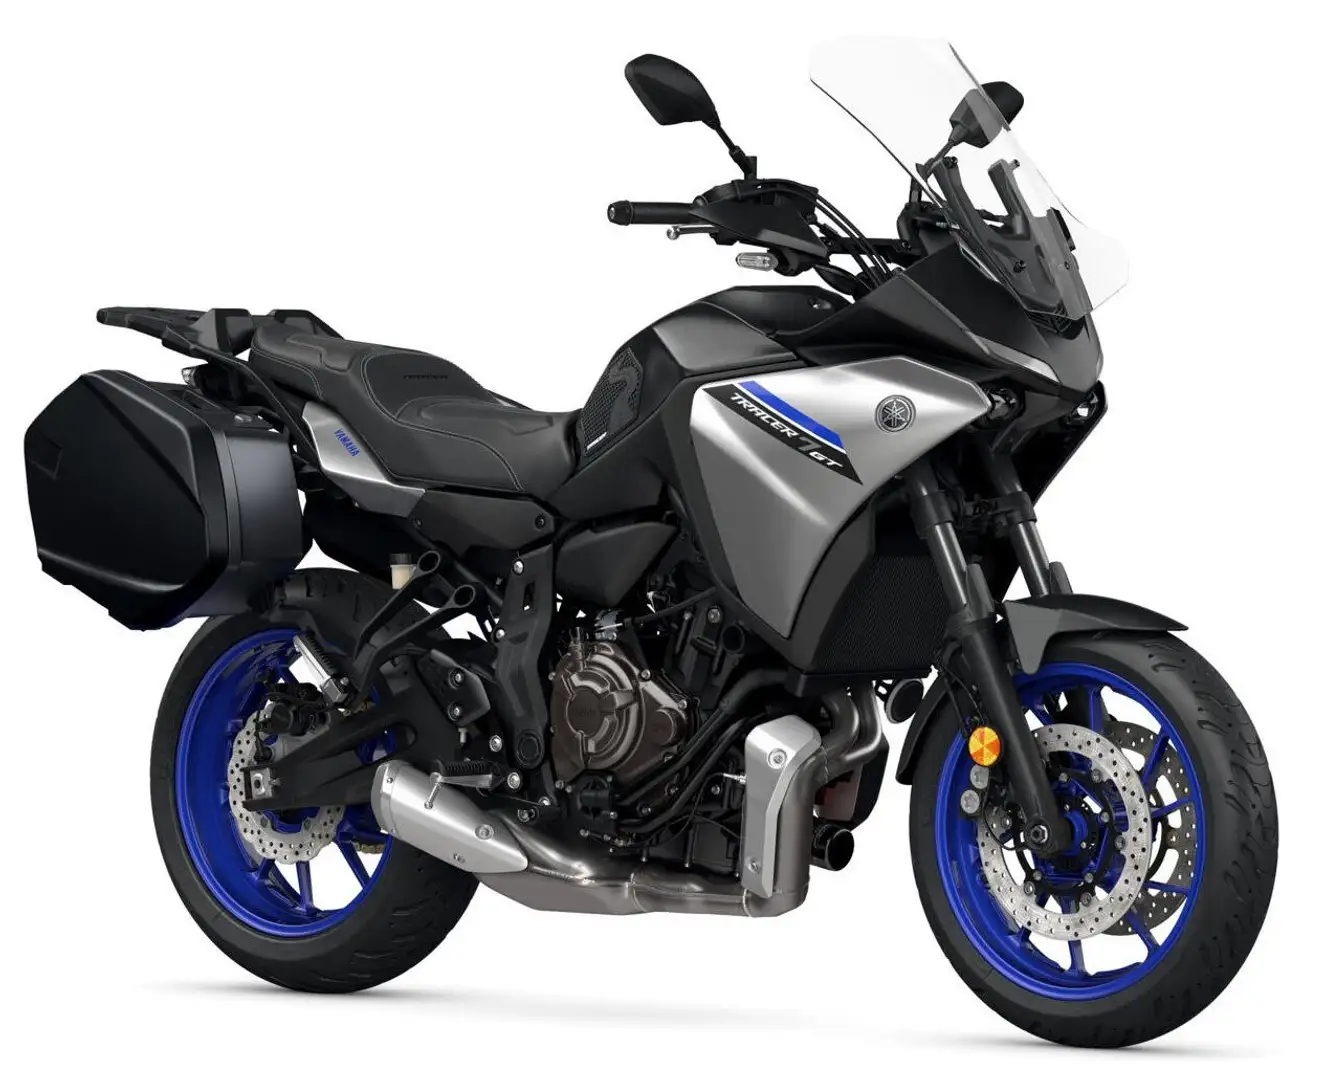 nuovo Yamaha Tracer 700 Sport touring a Parma - Pr per € 10.199,-